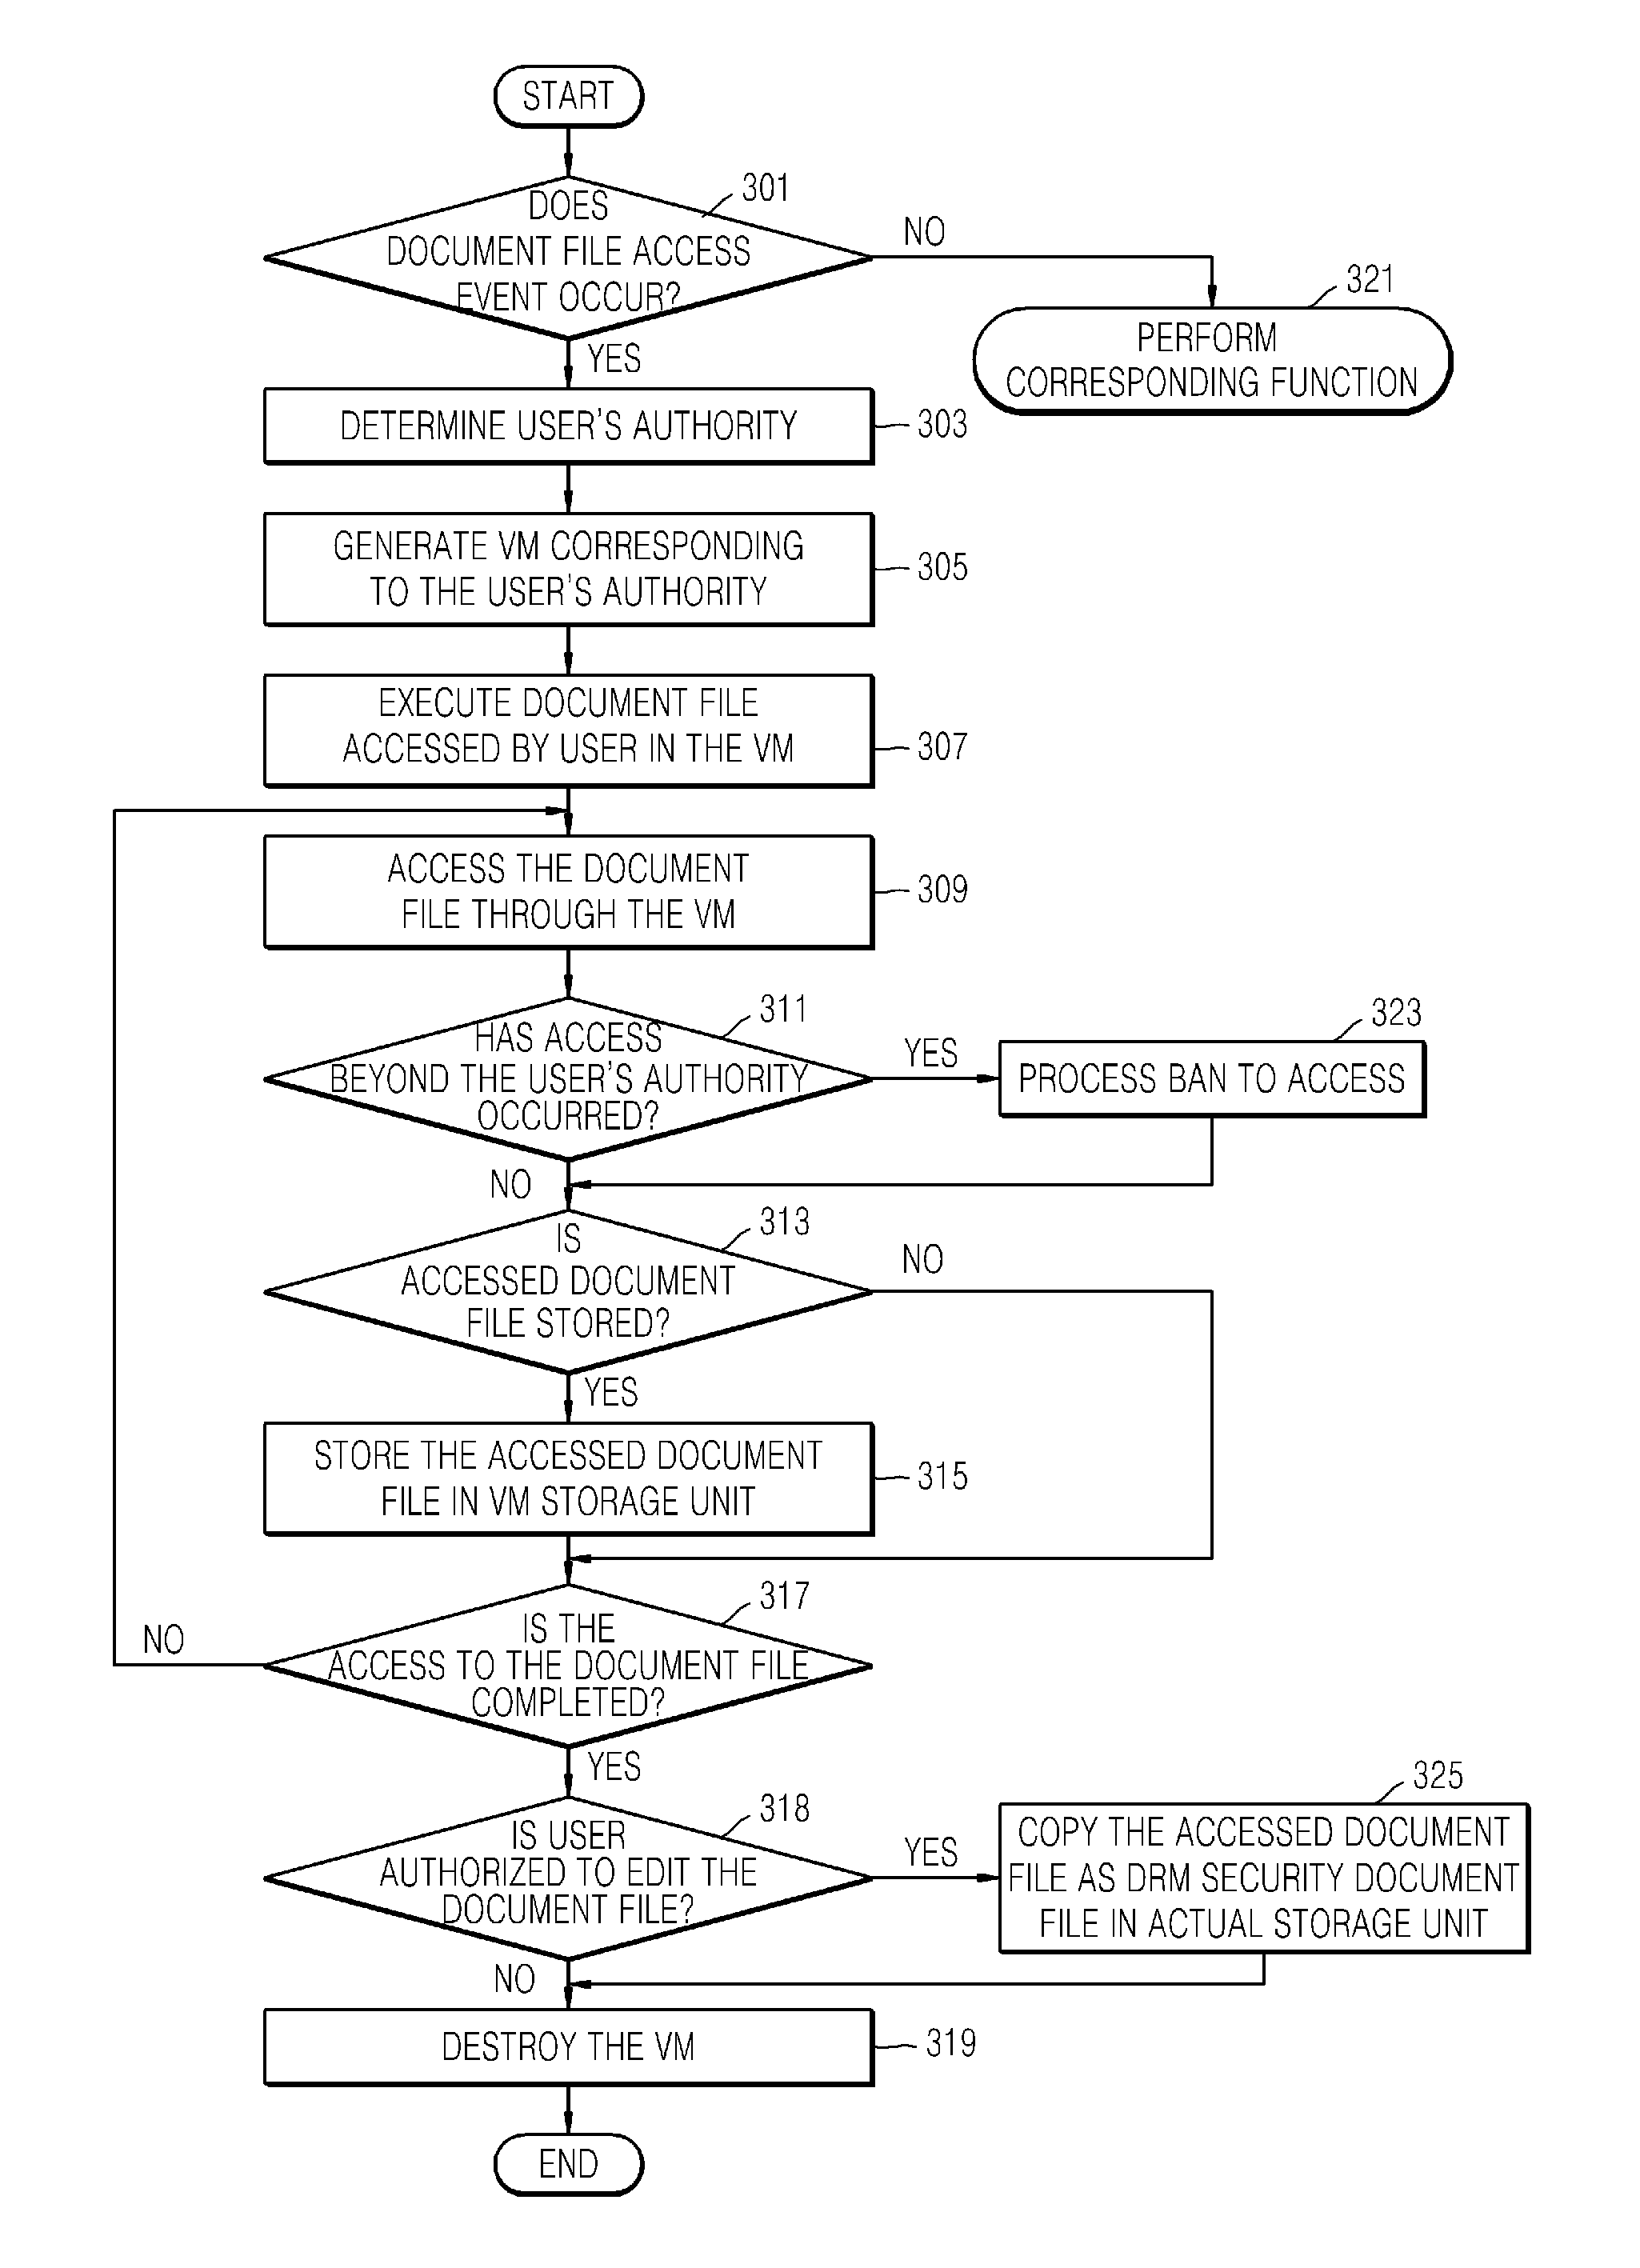 Apparatus and method for managing digital rights using virtualization technique